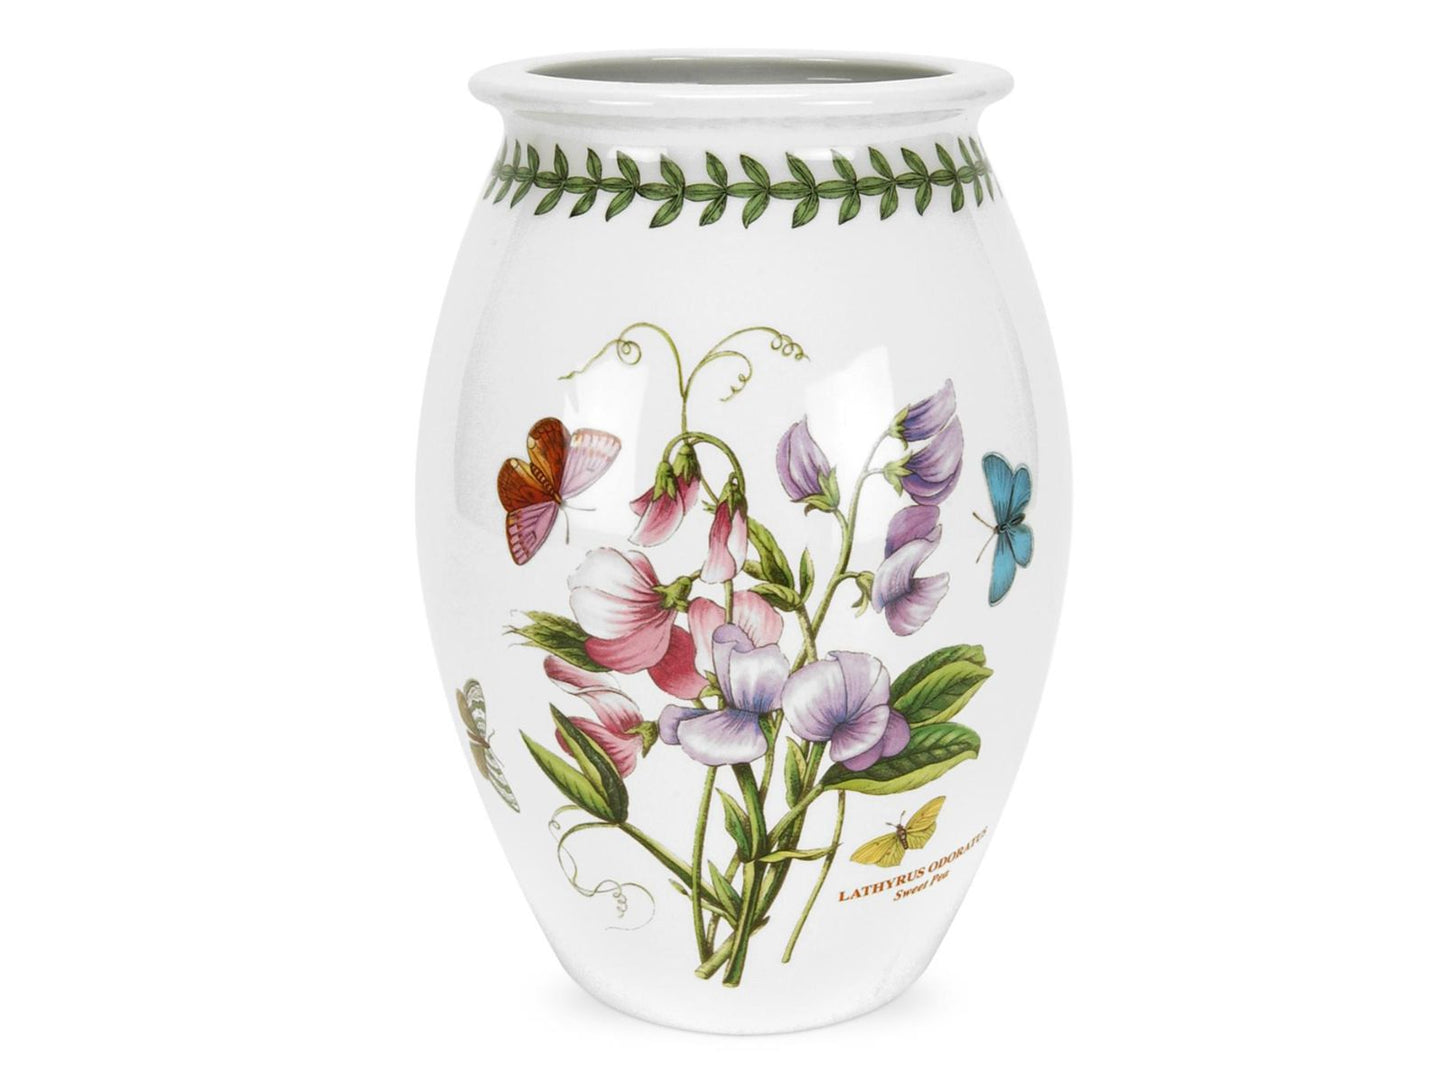 A tall white porcelain vase with a green laurel wreath rim and a large pink and purple sweet pea design on the front and back